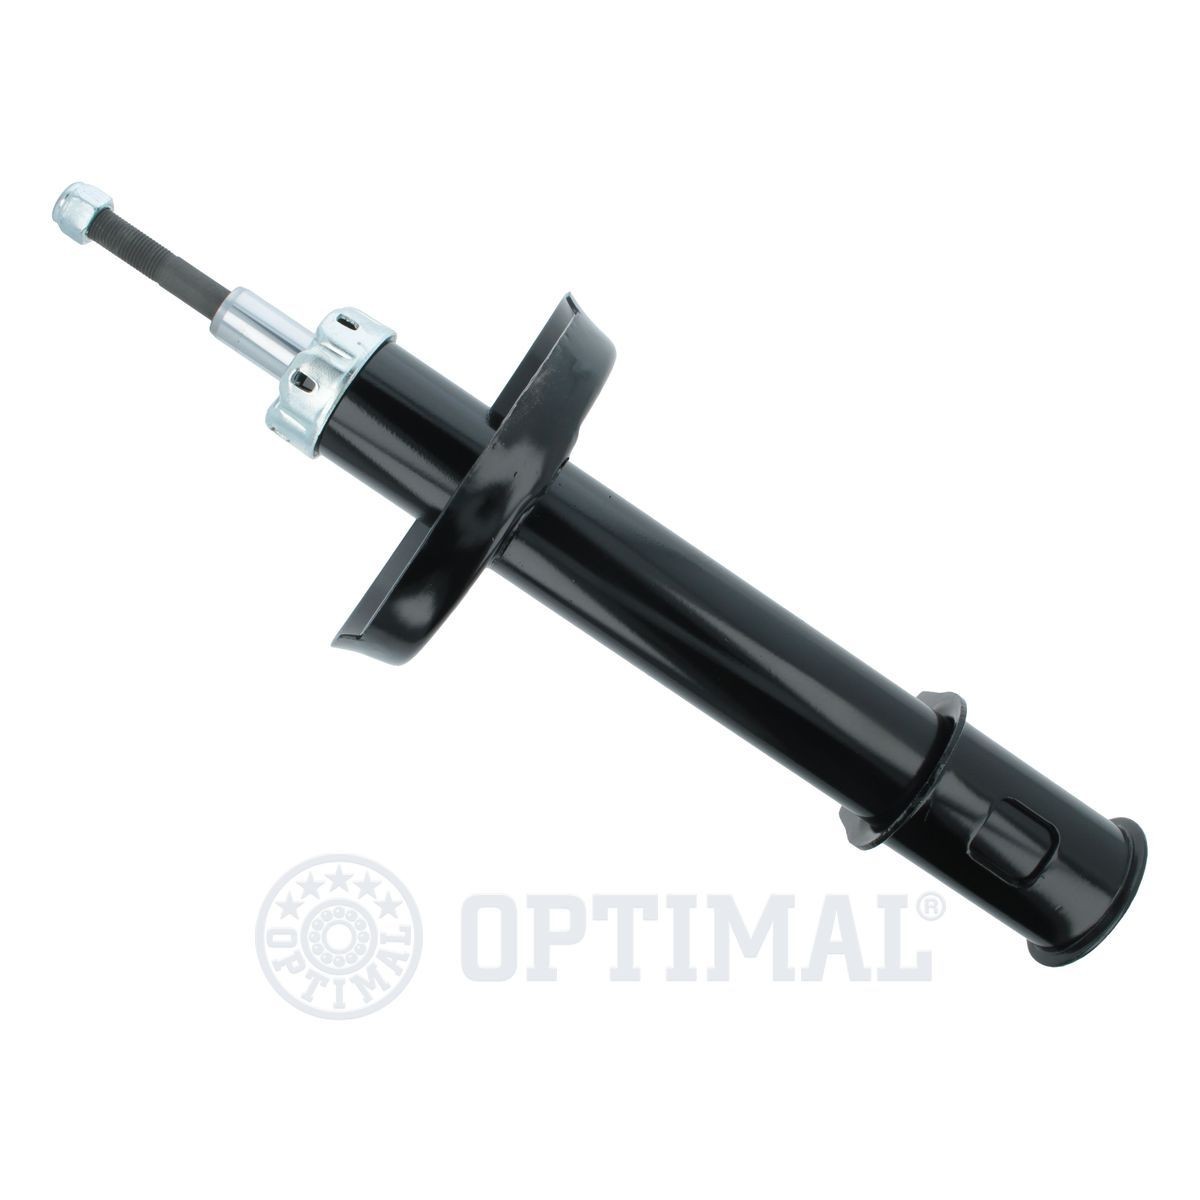 OPTIMAL A-3602H Shock absorber Front Axle, Oil Pressure, Twin-Tube, Suspension Strut, Top pin, Bottom Clamp, M12x1,25